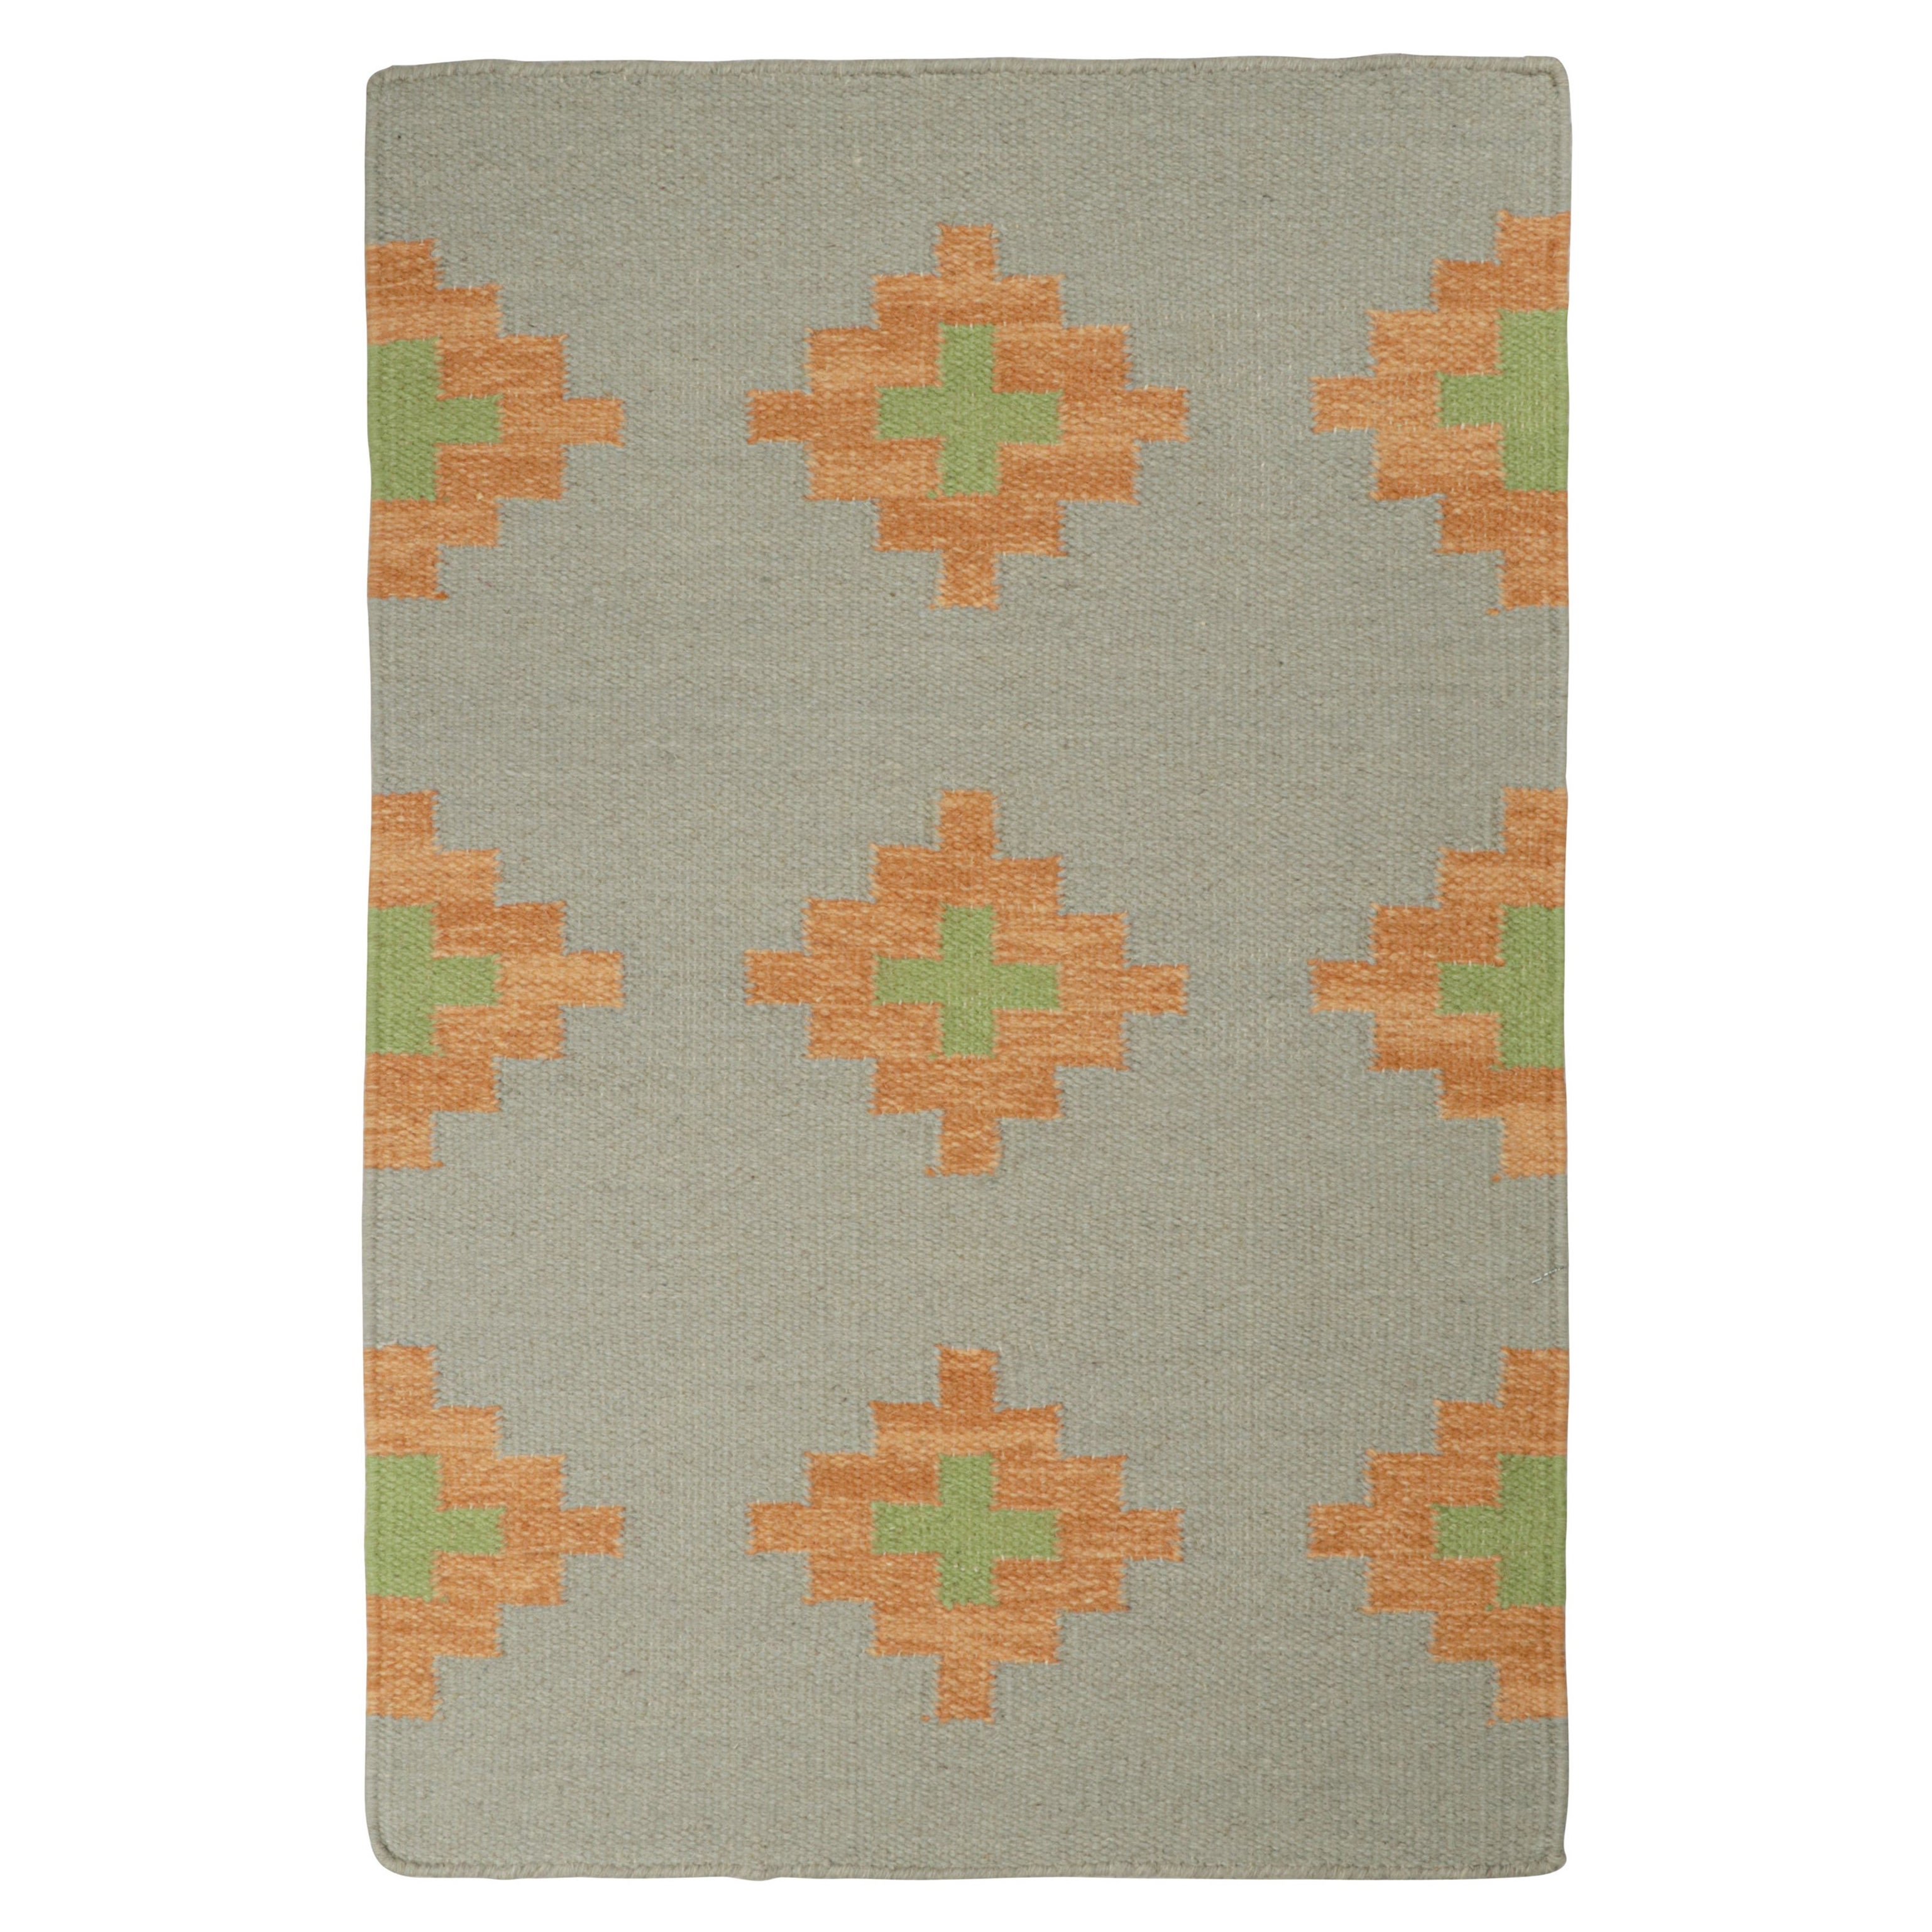 Rug & Kilim’s Tribal style Kilim in Grey with Gold & Green Patterns